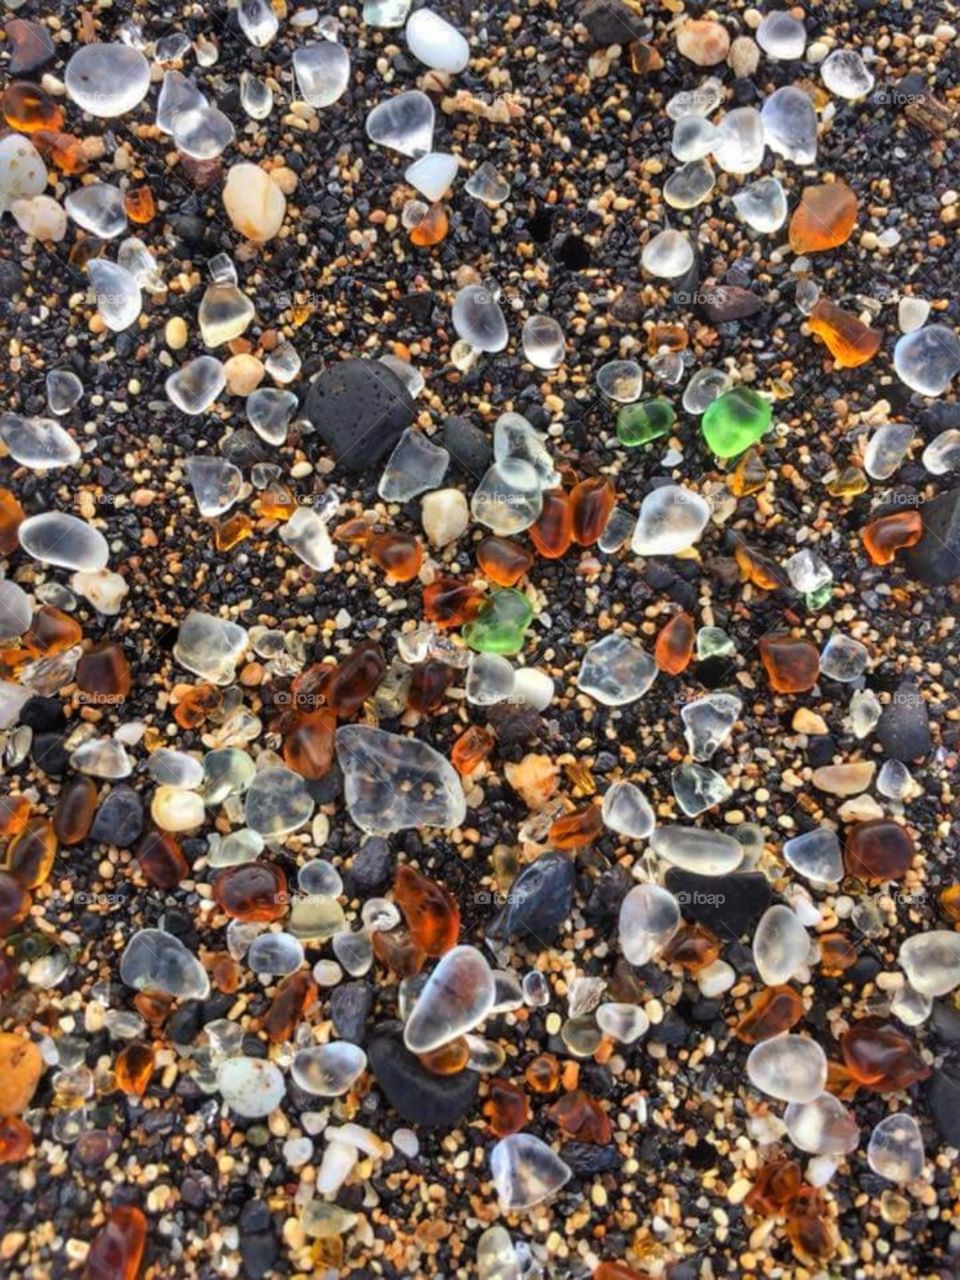 where nature has turned pollution into ... The sea just rolls them around and makes beautiful stones.